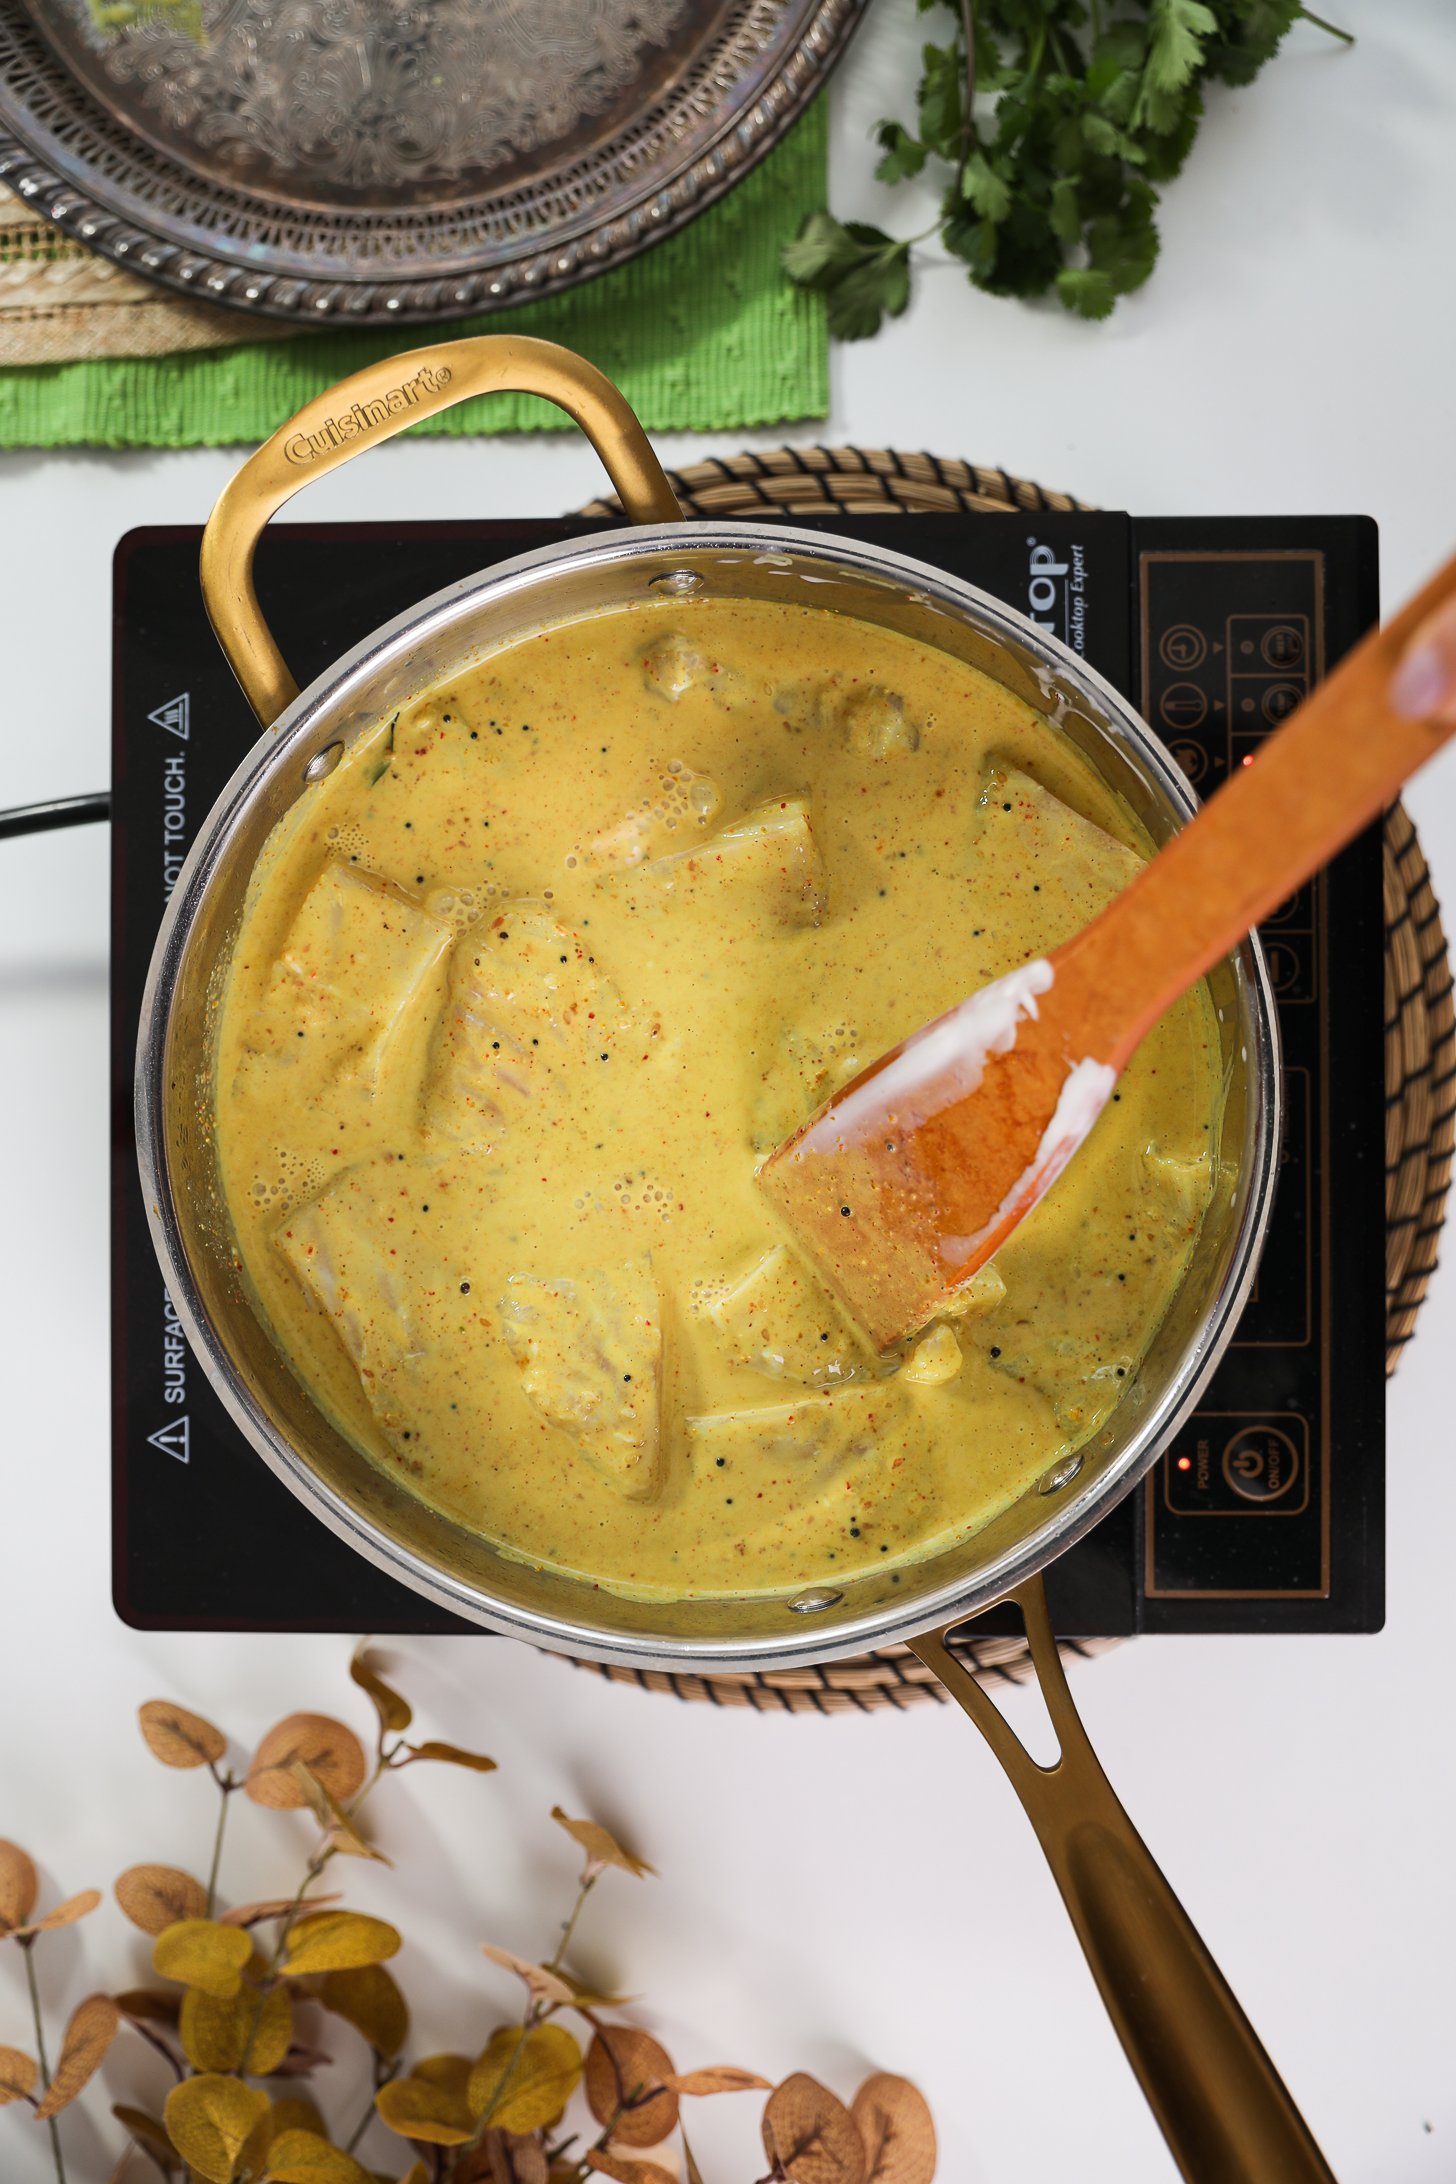 Mobile cooktop showcasing a pan of fish fillets gently simmering in curry sauce, accompanied by a wooden spatula.